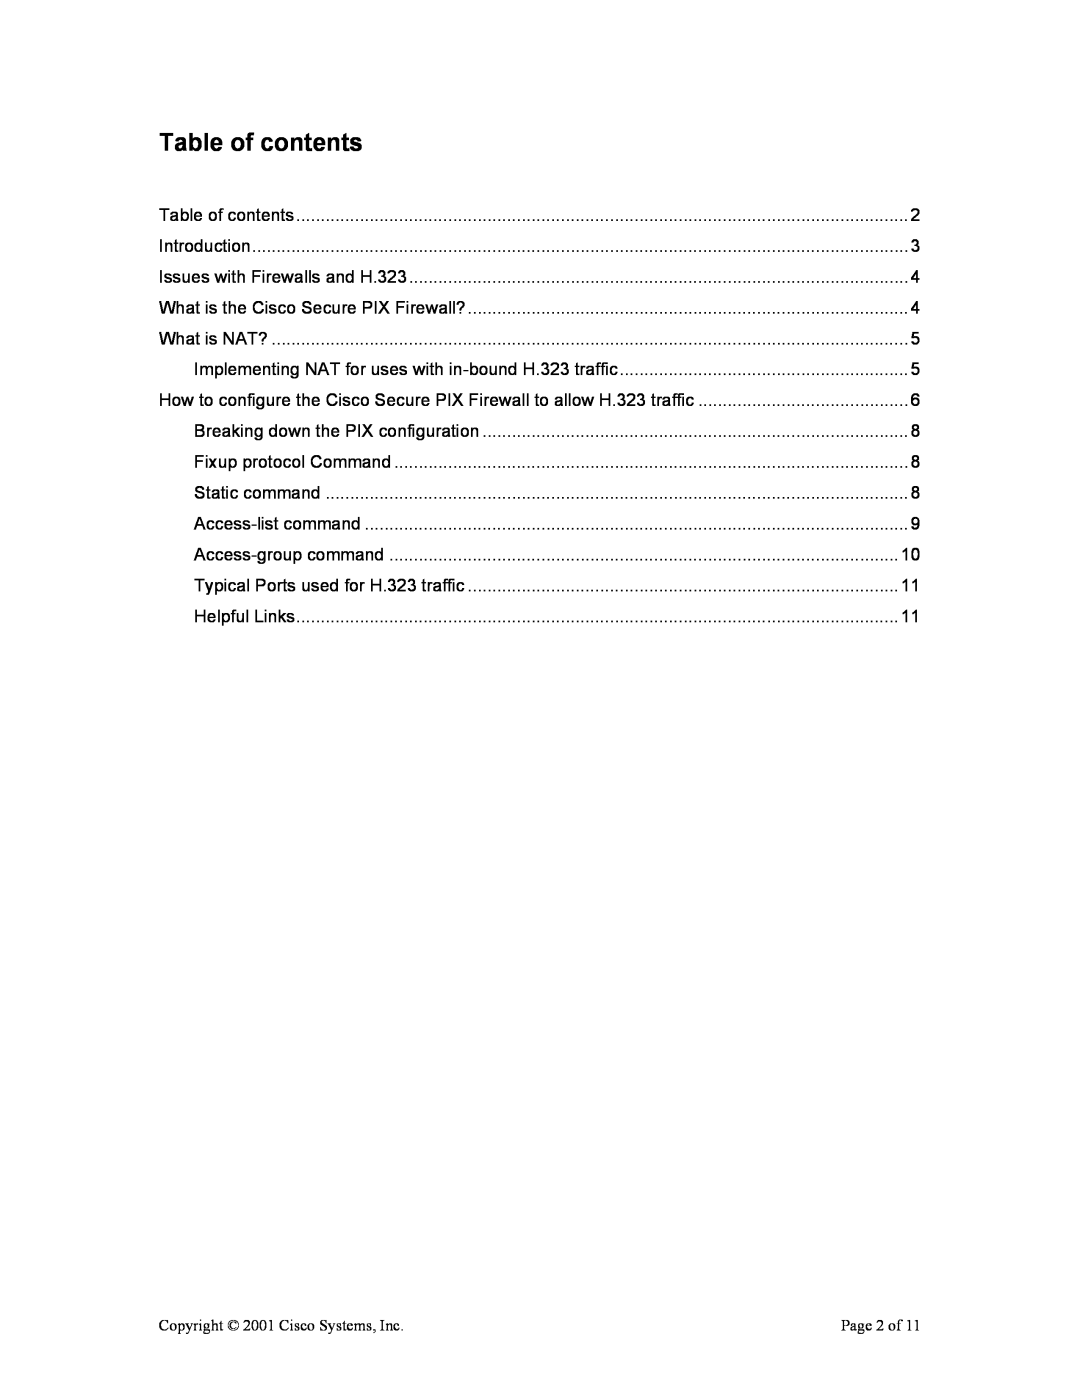 Cisco Systems EDCS-154011 manual Table of contents, Implementing NAT for uses with in-bound H.323 traffic 